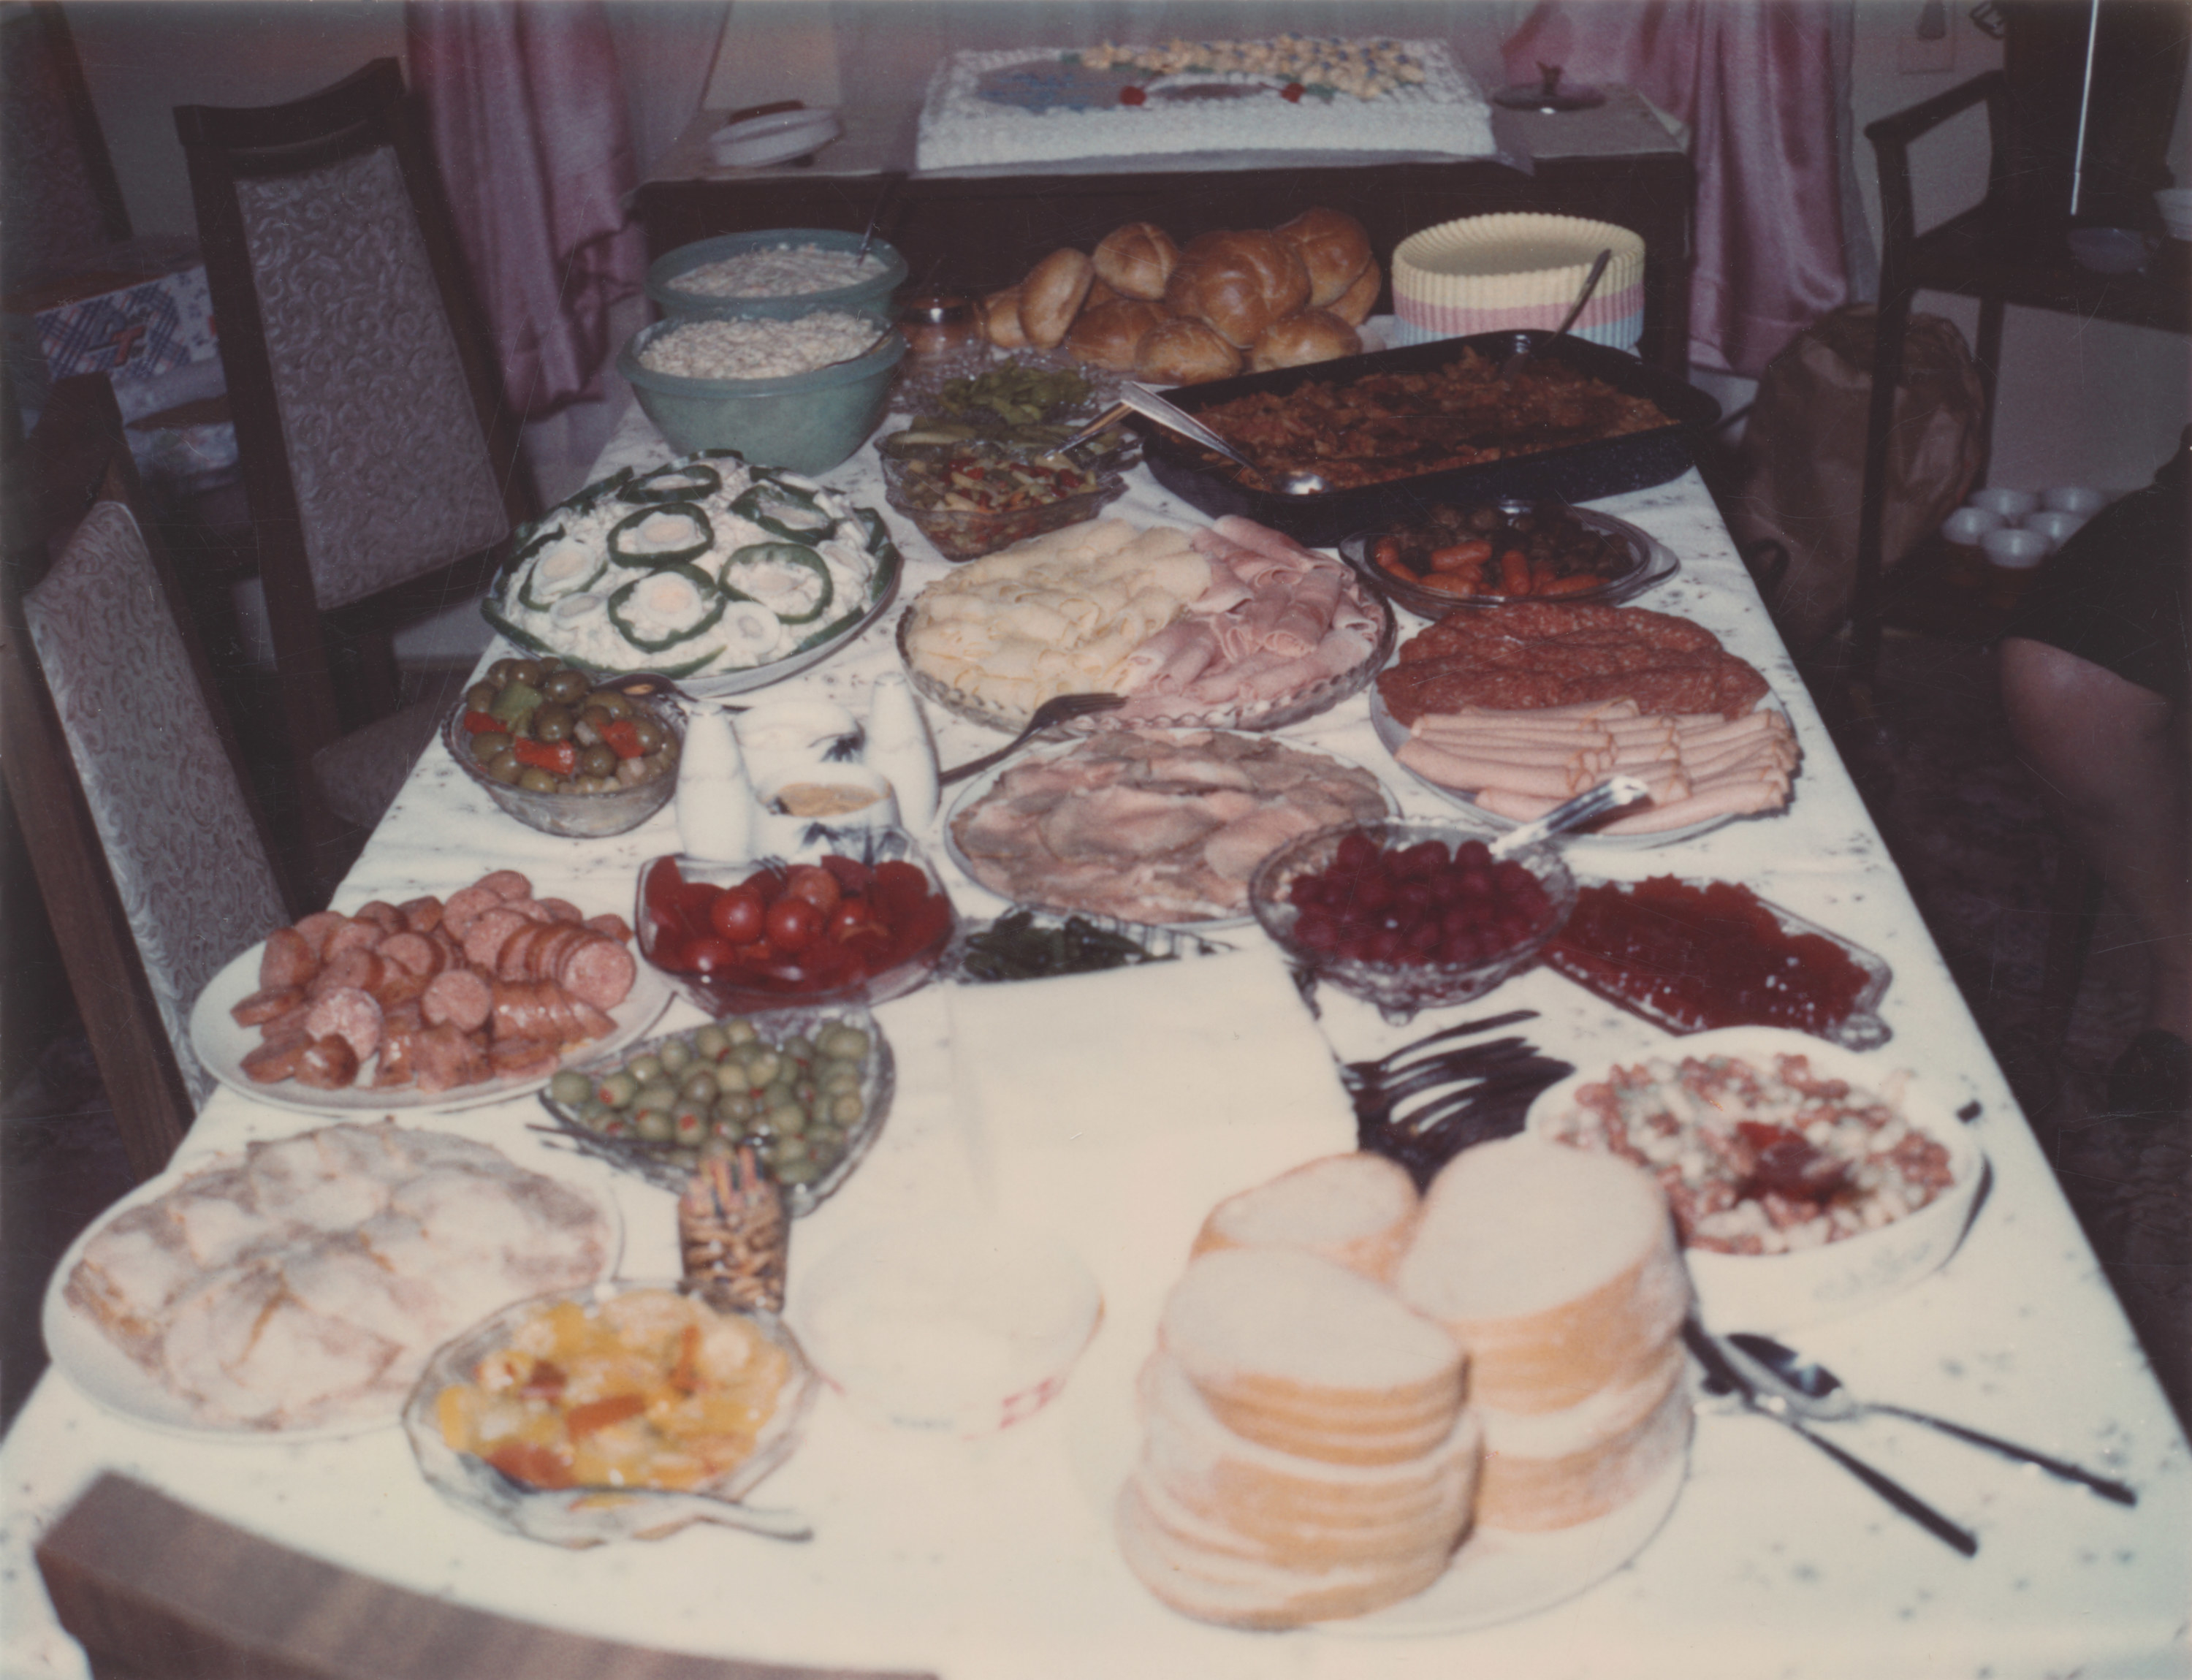 A large table of different foods